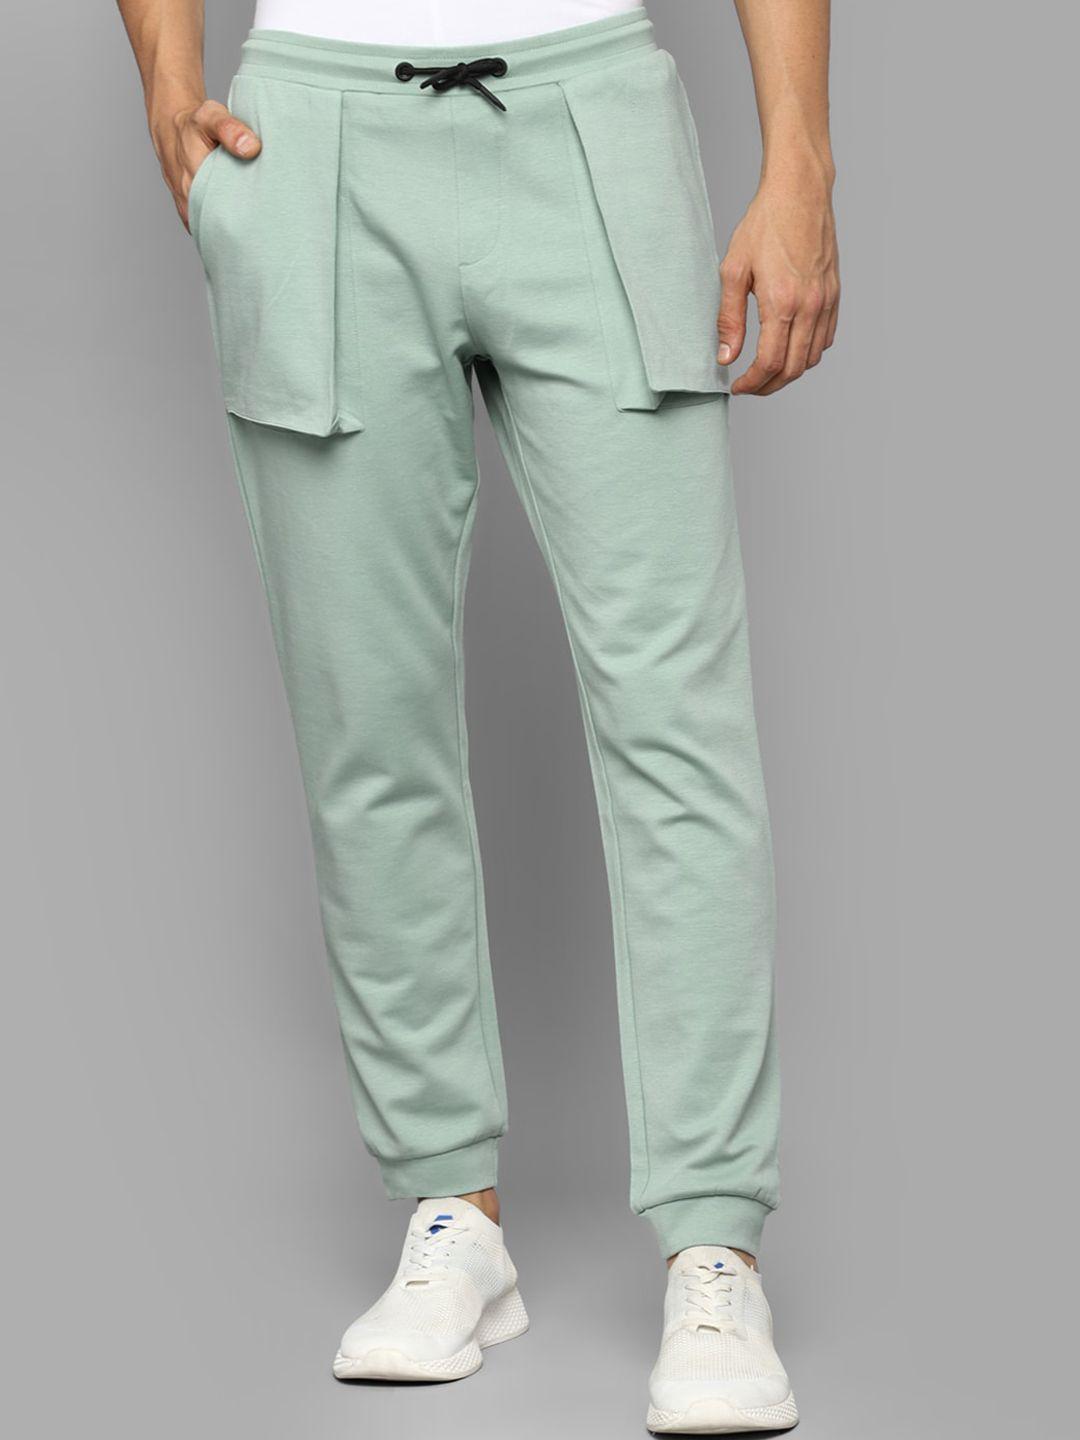 allen solly tribe men sea green solid jogger track pant